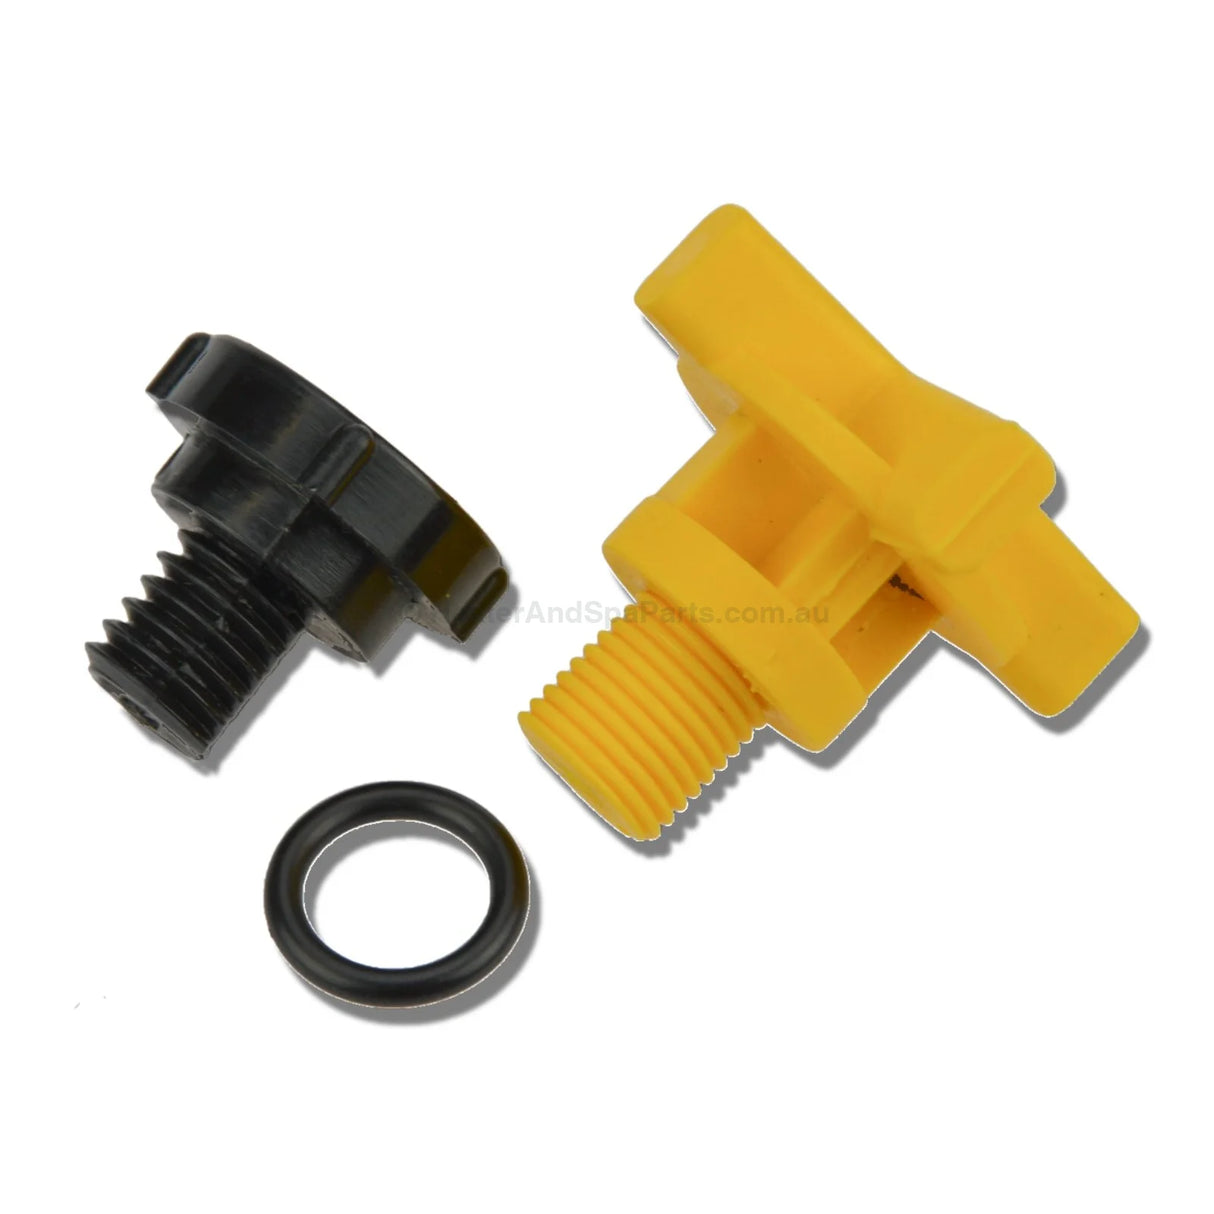 Pool & Spa Filter Air Bleed Screw & Oring - Davey Hurlcon SpaQuip Poolrite and more - Two Sizes - Heater and Spa Parts